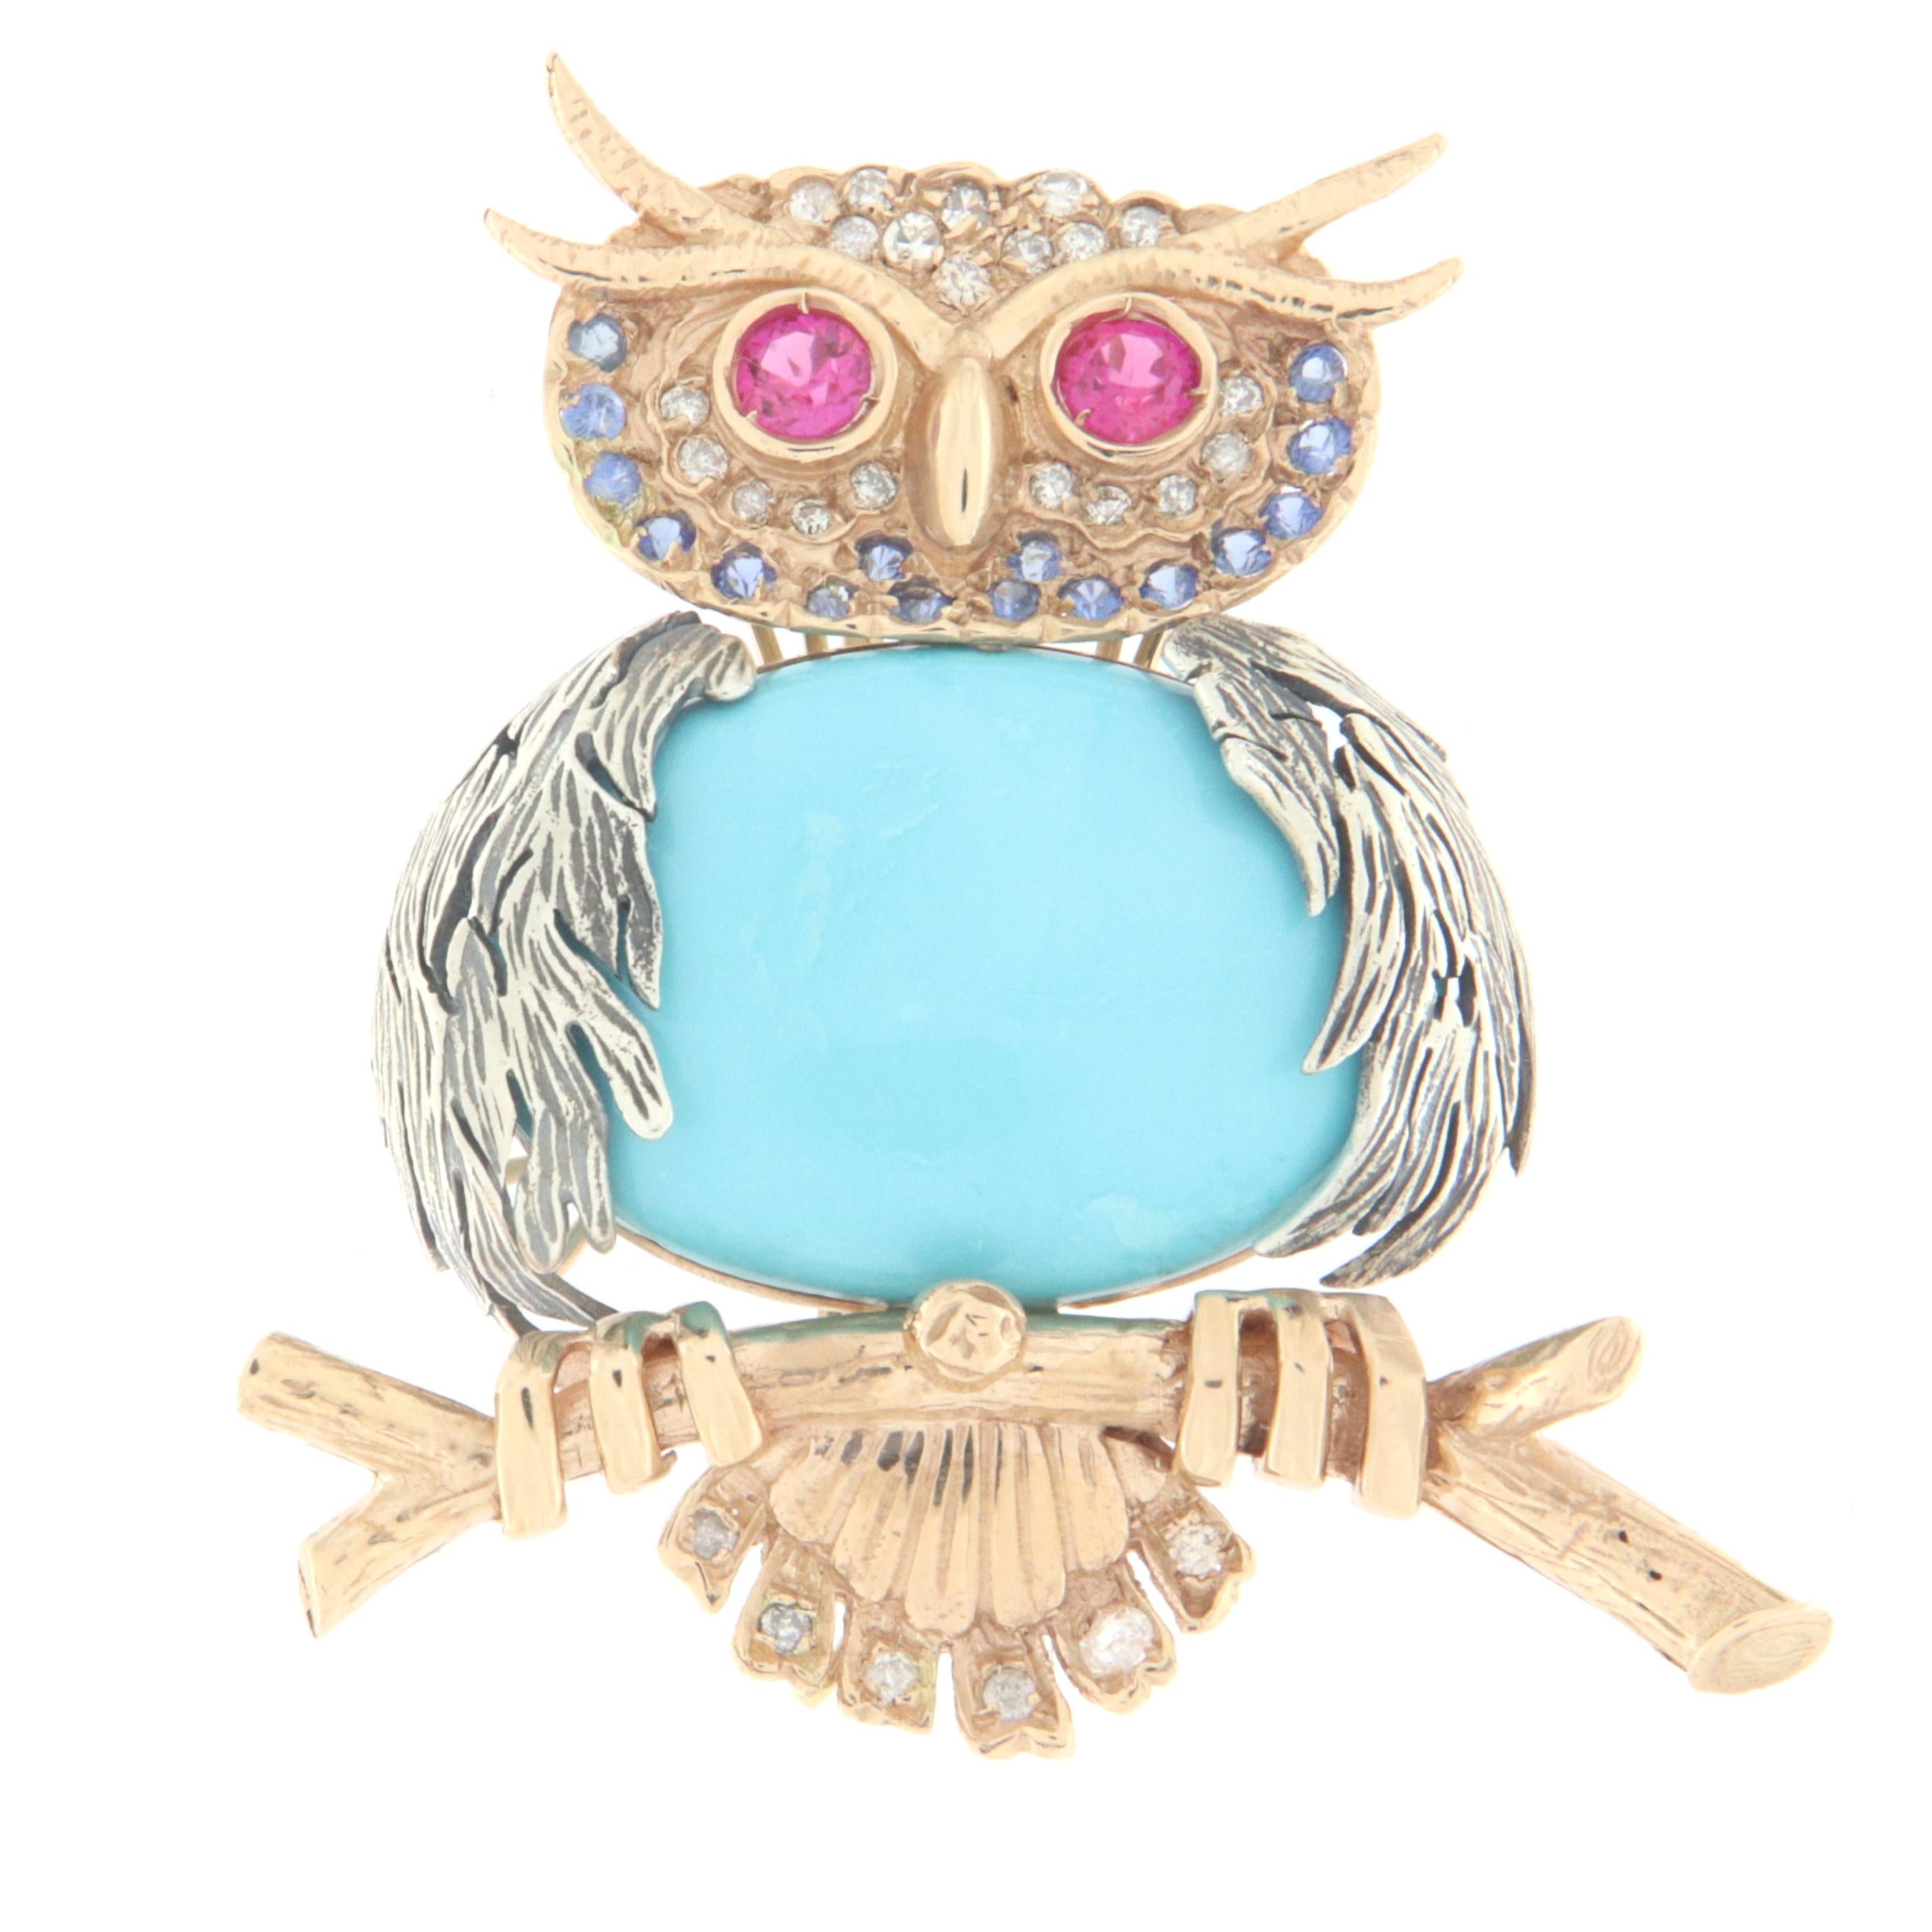 Owl 14 karat yellow gold and 800 thousandths silver brooch.Handmade by our artisans assembled with turquoise tourmalines,diamonds and sapphires

Brooch total weight 30 grams
Diamonds weight 0.45 karat
Tourmaline weight 0.80 karat
Turquoise weight